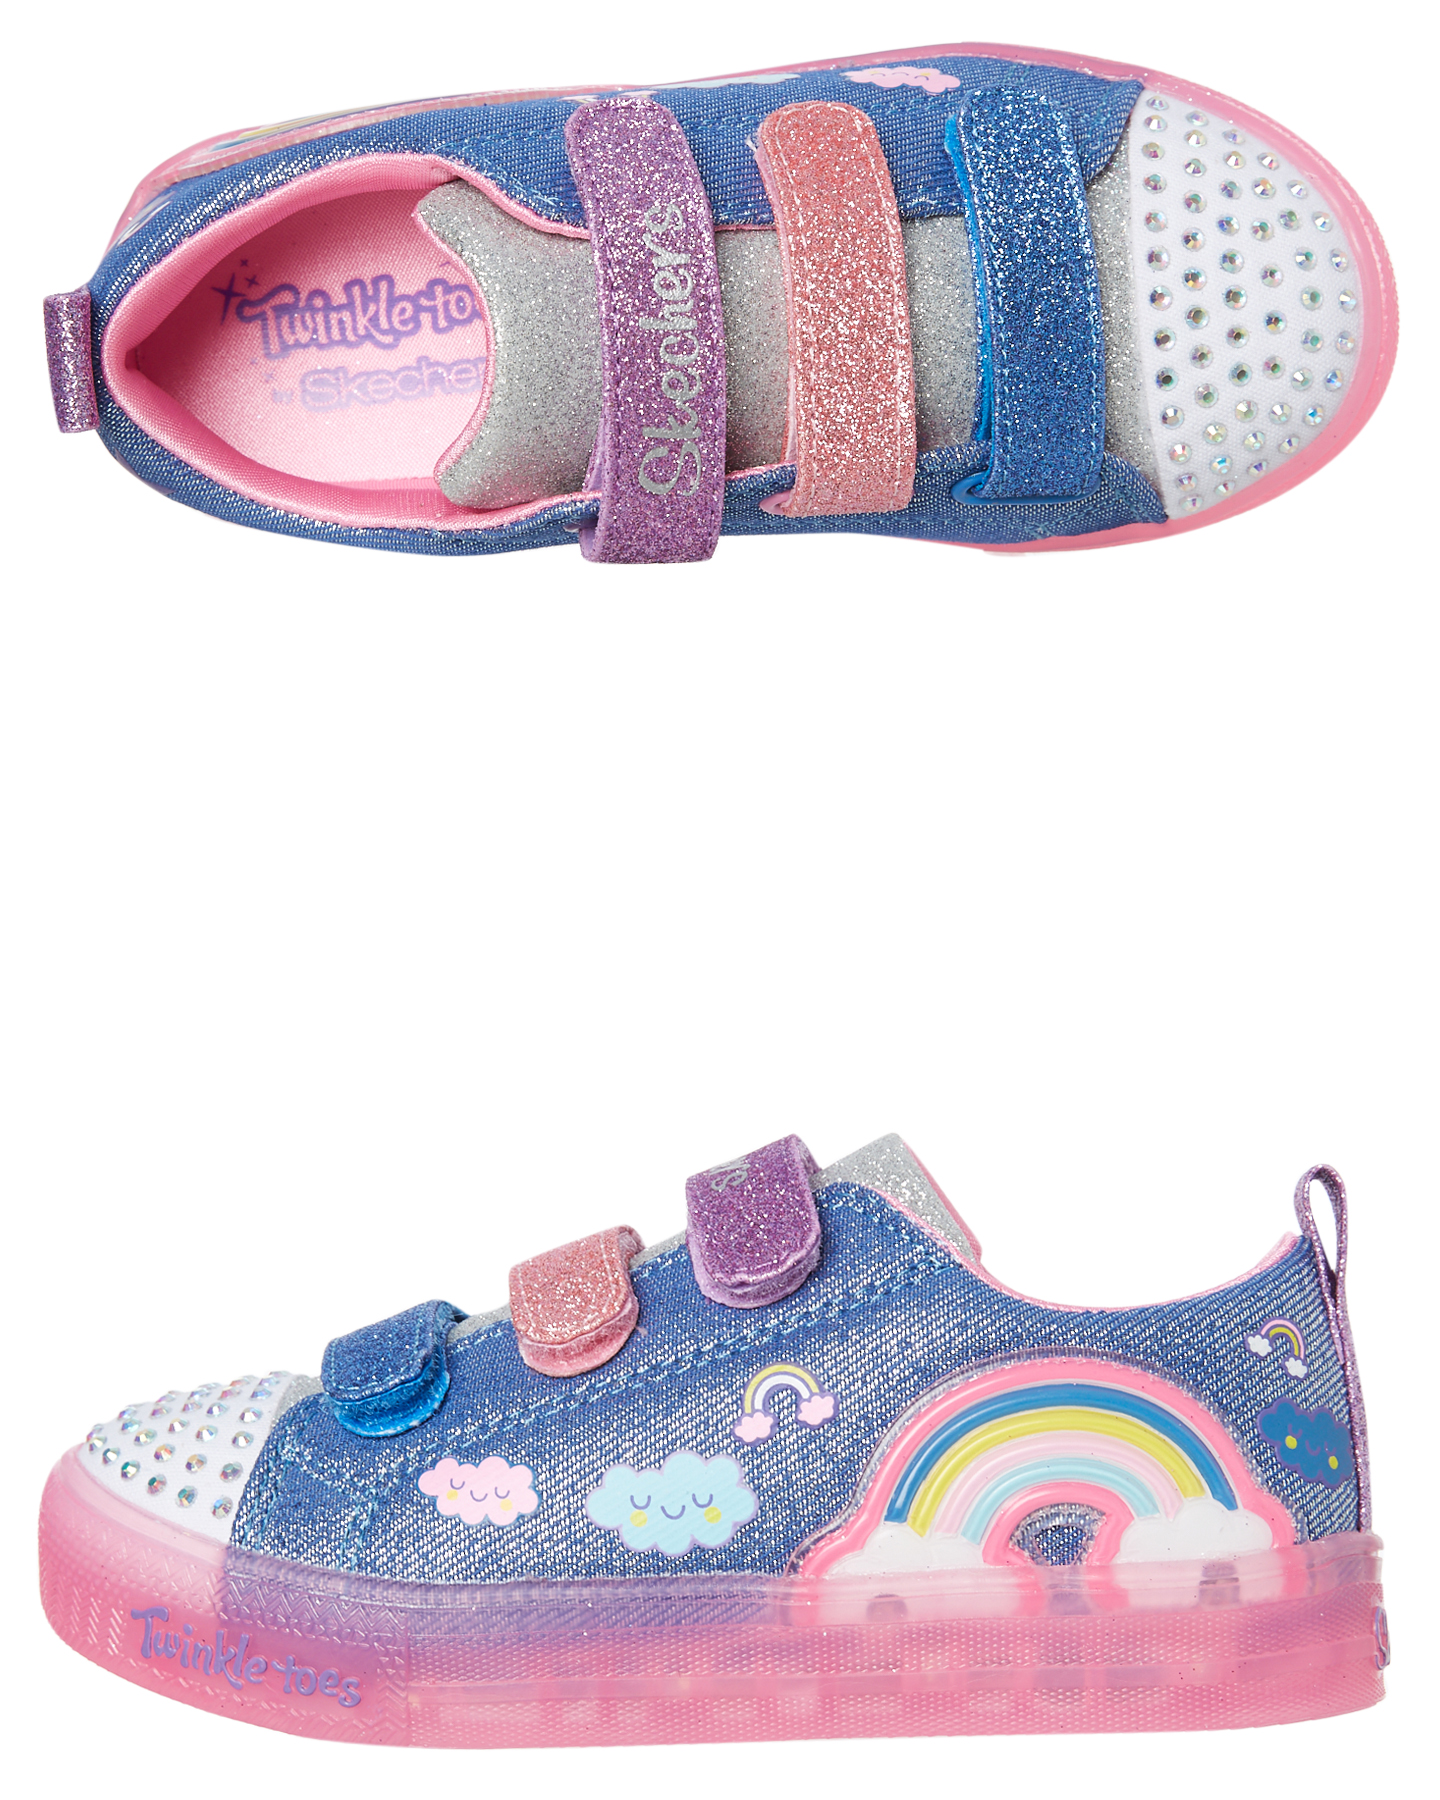 skechers girl shoes price